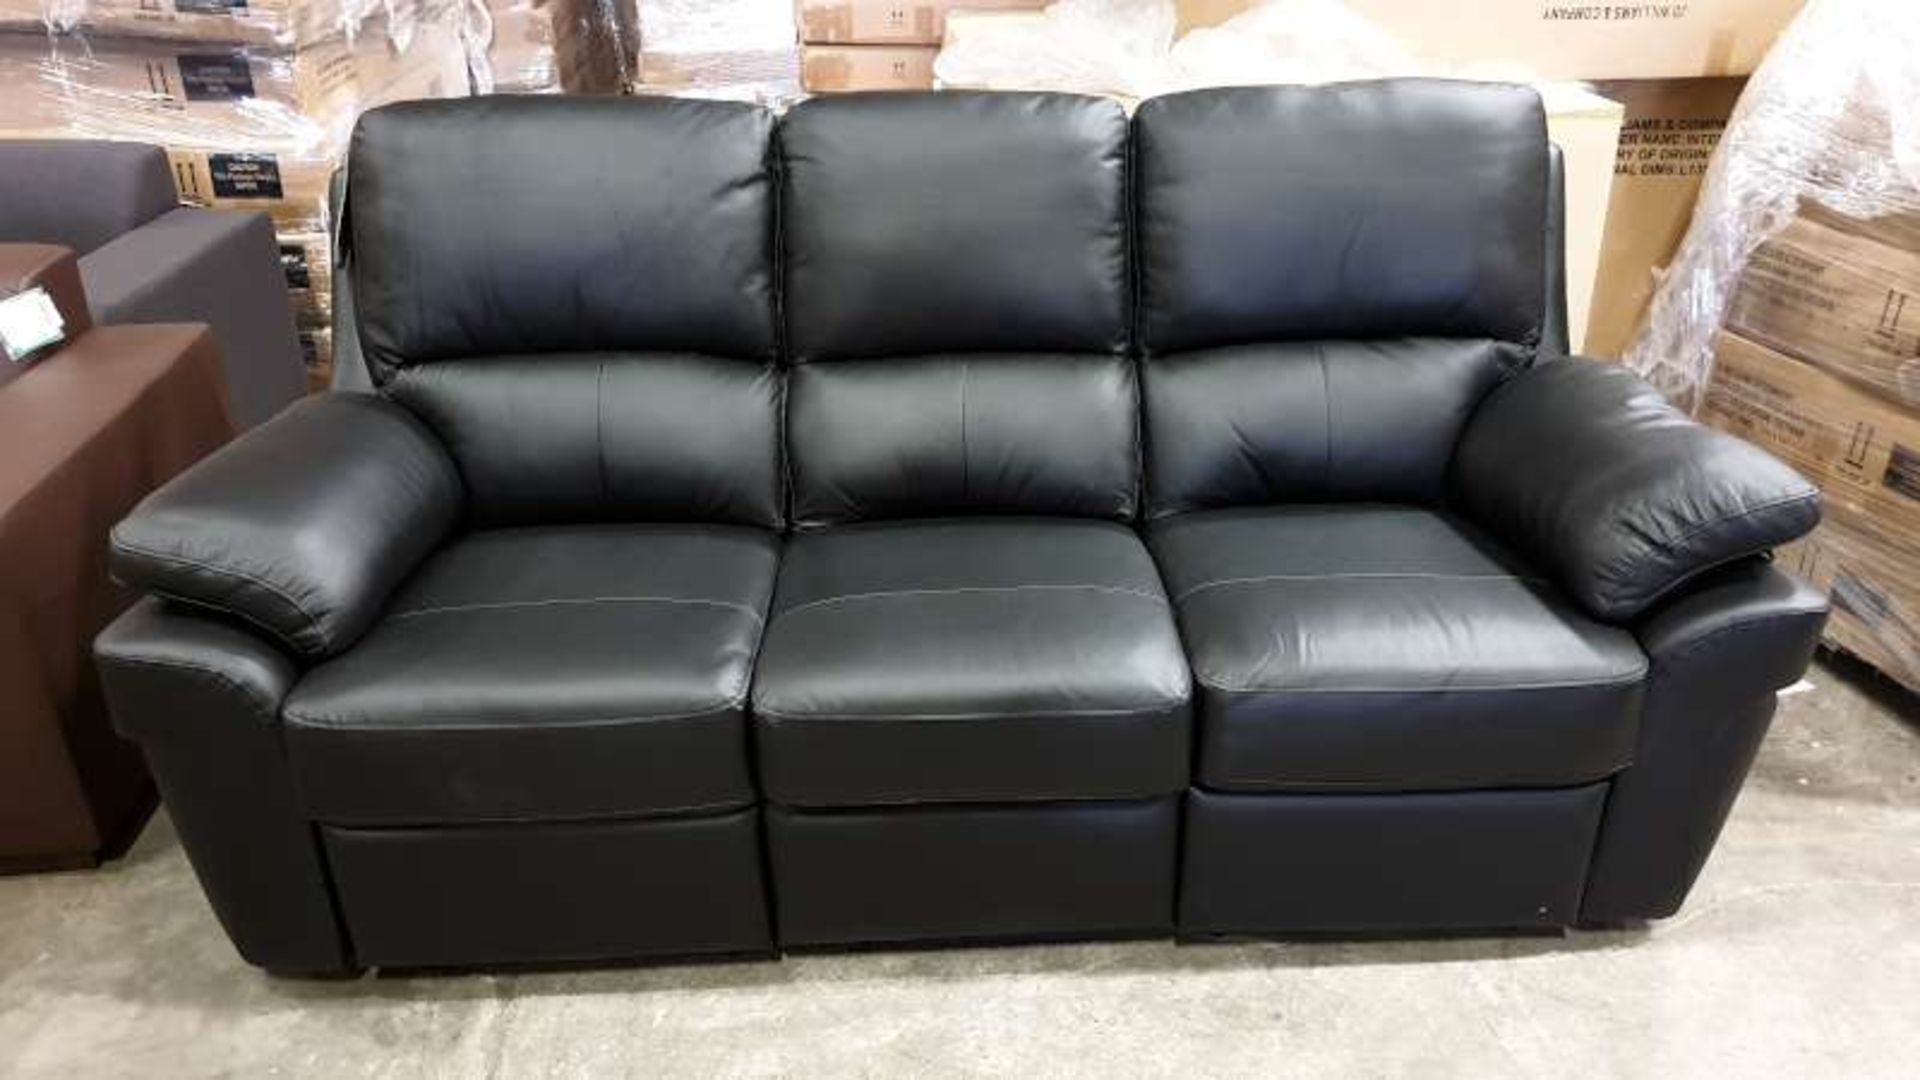 BRAND NEW MILAN 3 SEATER WITH 2 RECLINERS COLOUR BLACK